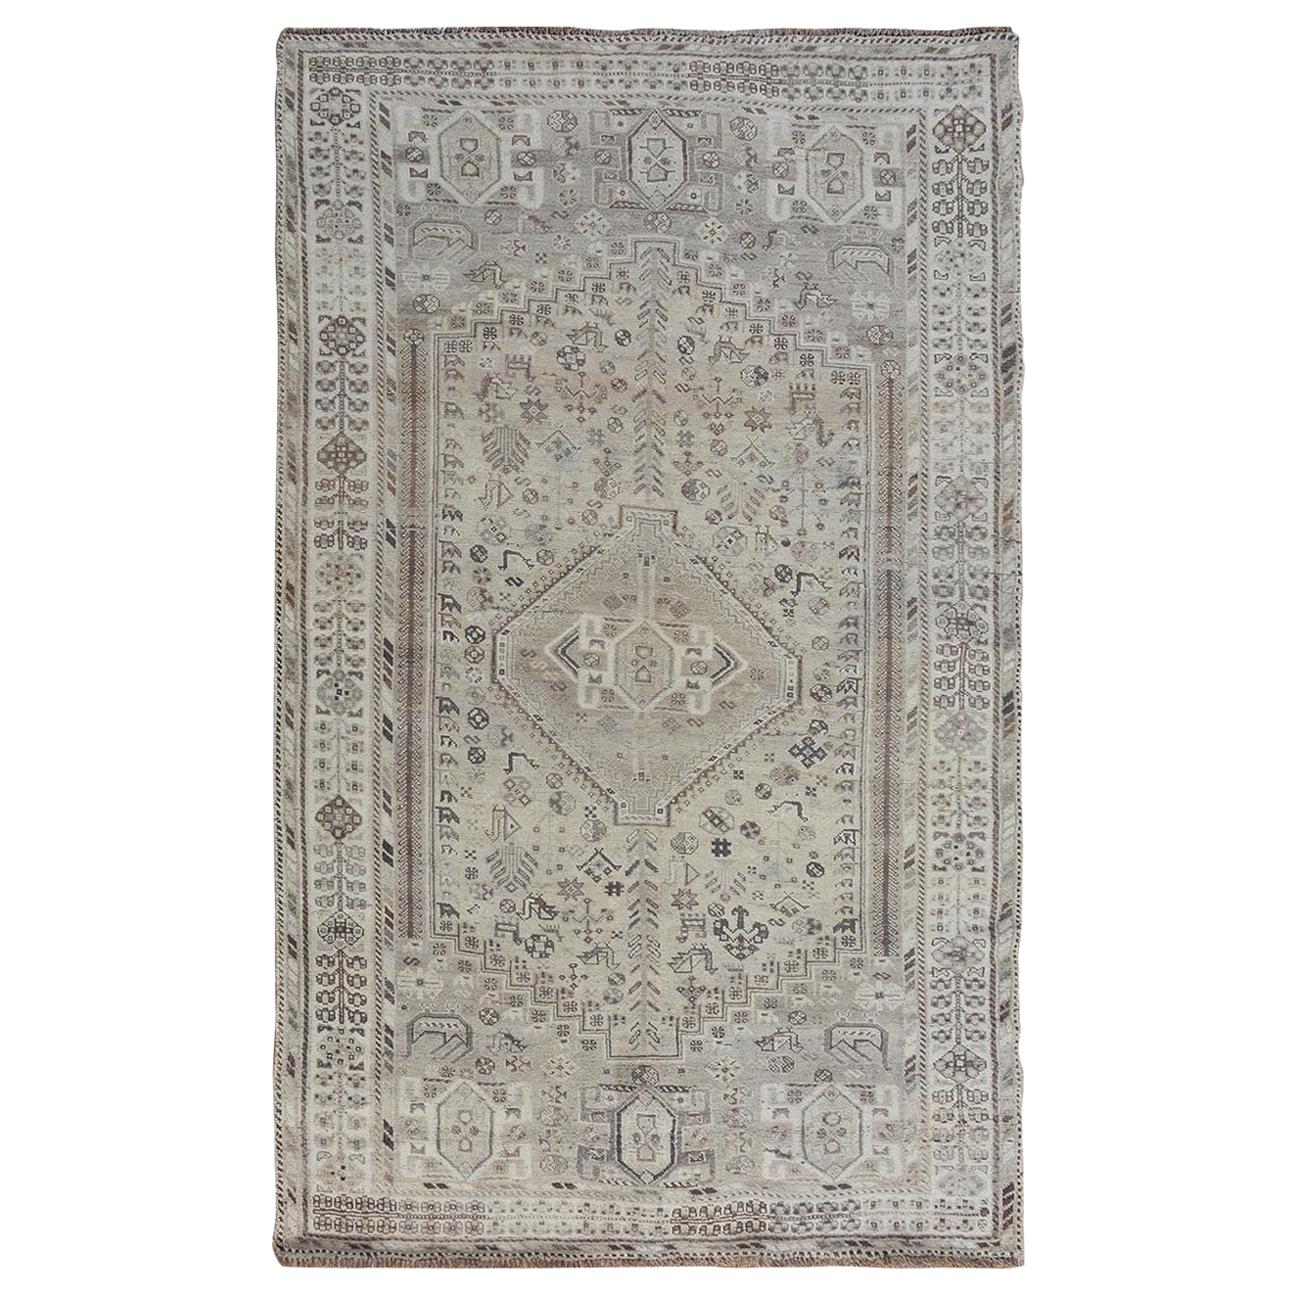 Washed Out Vintage and Worn Down Persian Qashqai Pure Wool Hand Knotted Rug